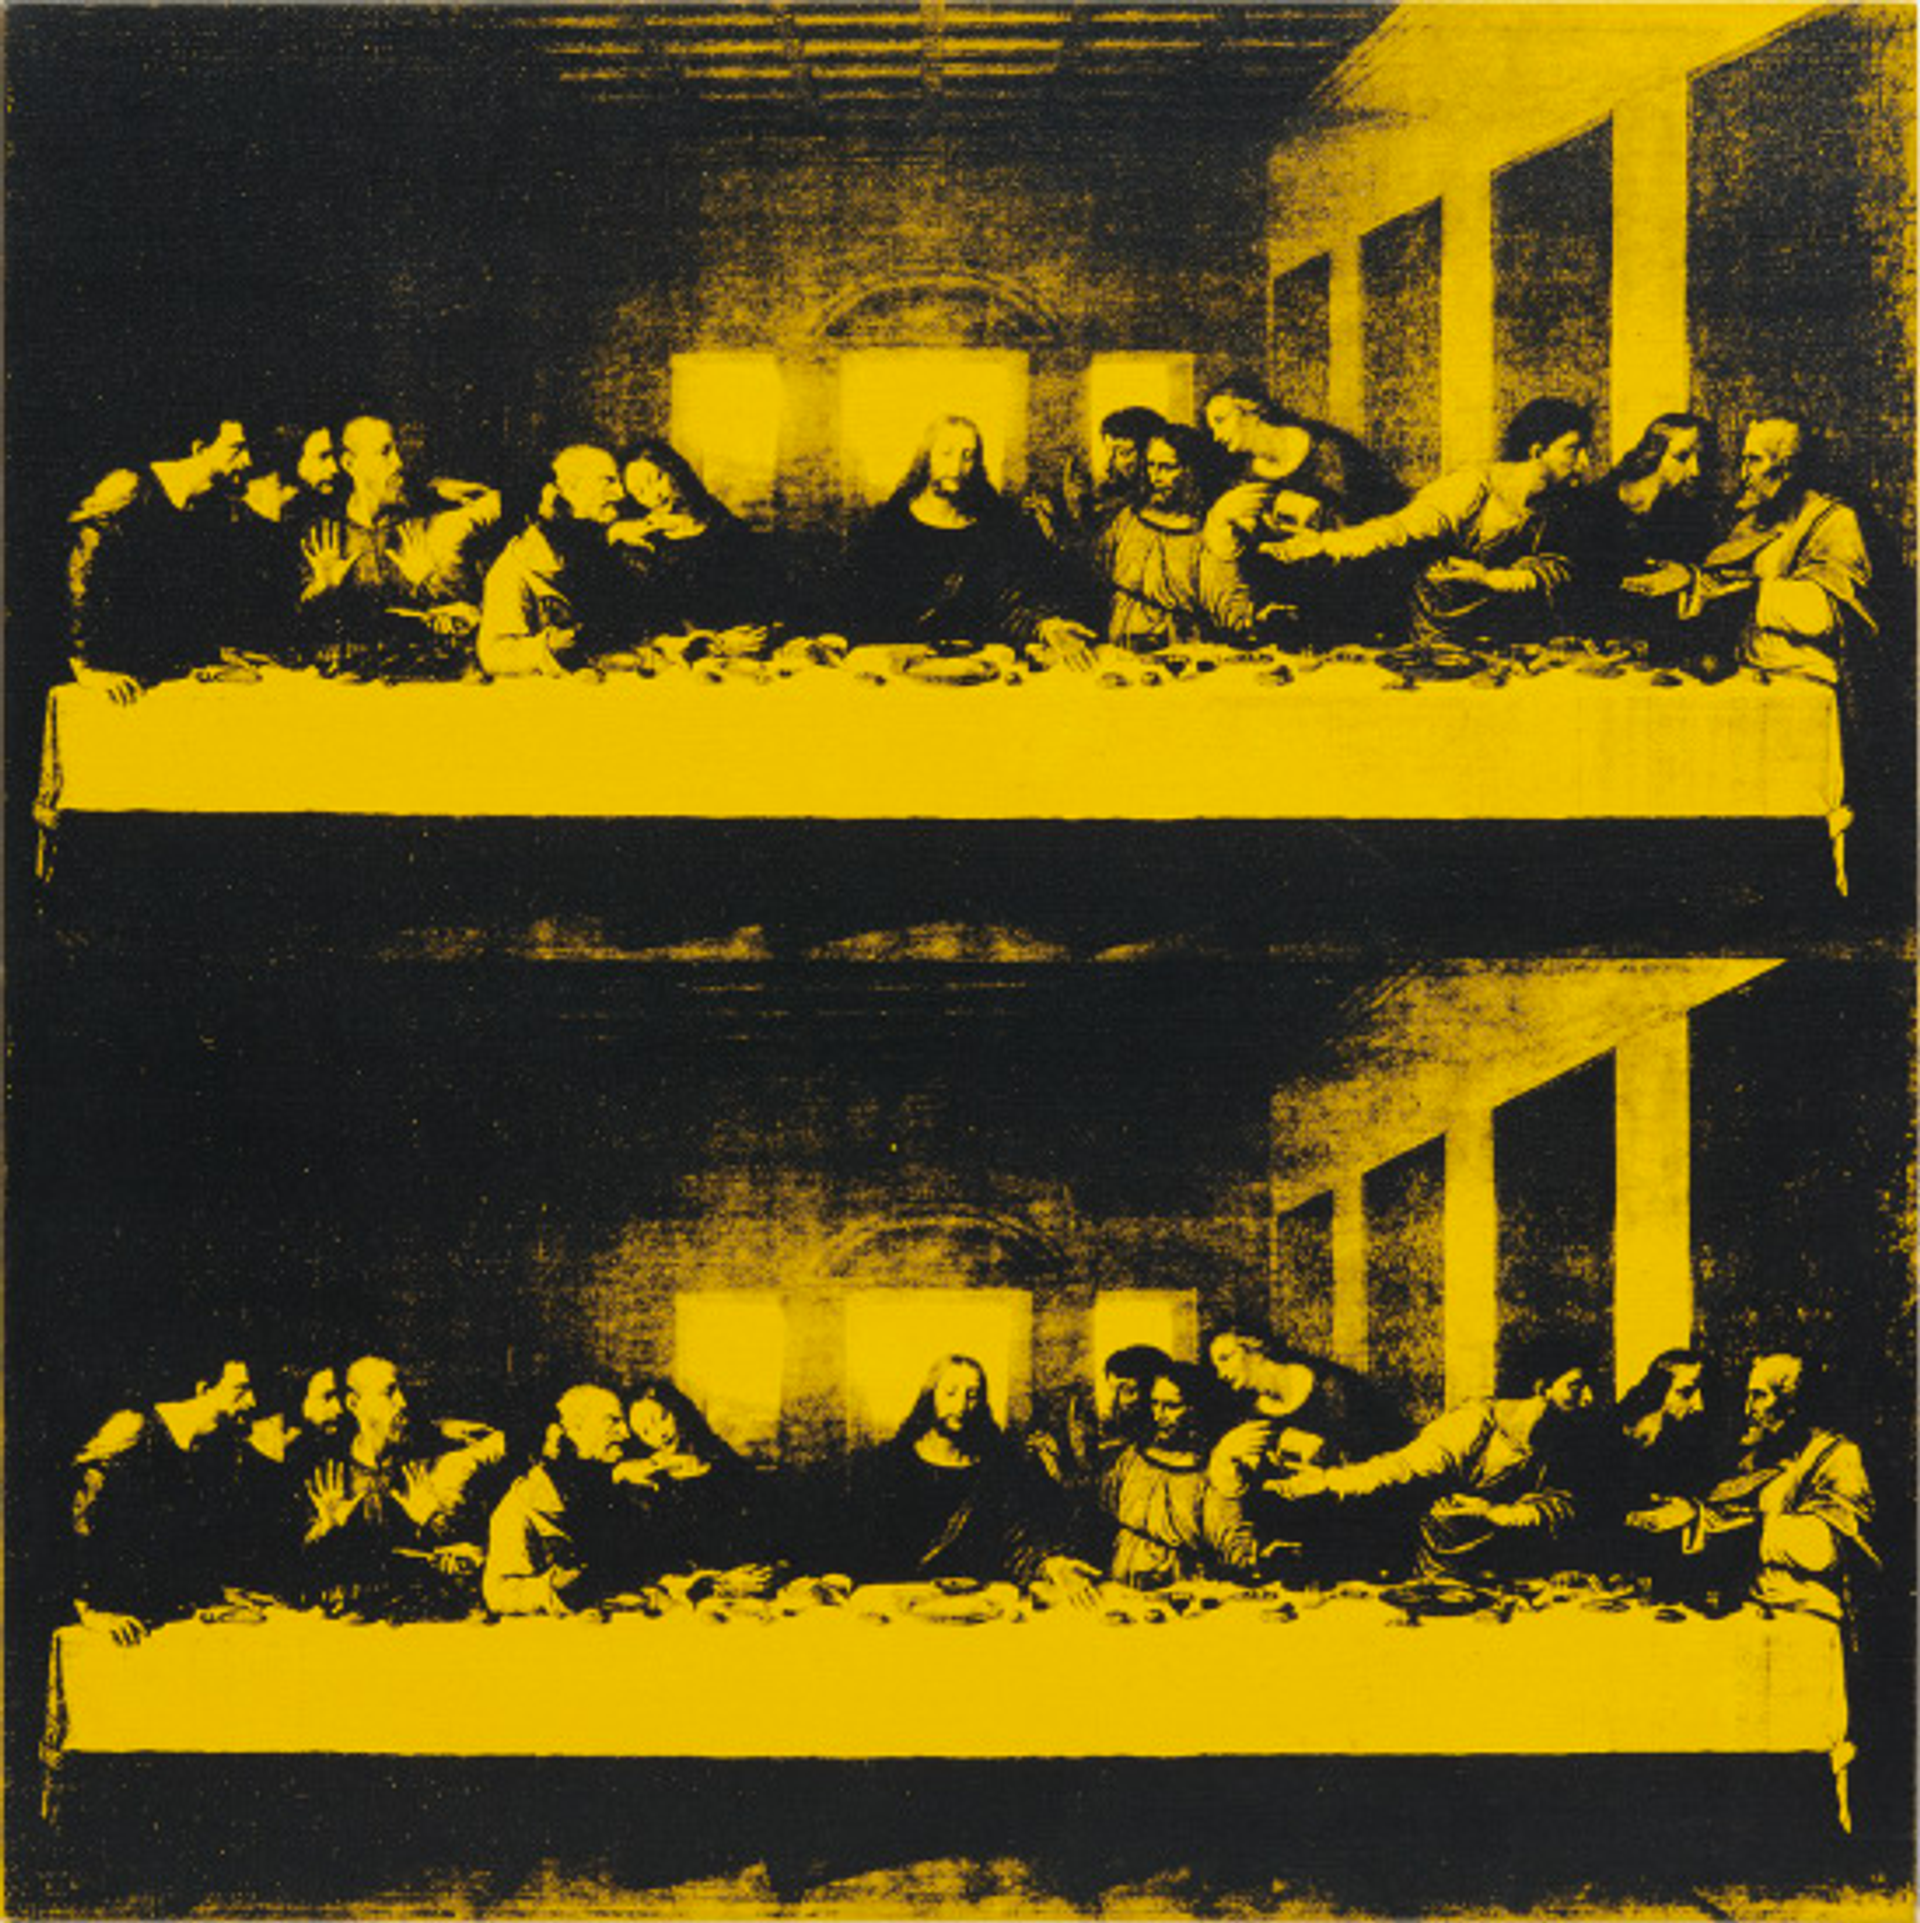 An image of a duplicate Last Supper by Leonardo Da Vinci, recreated by Andy Warhol. The Renaissance composition is rendered in high contrast yellow and black.